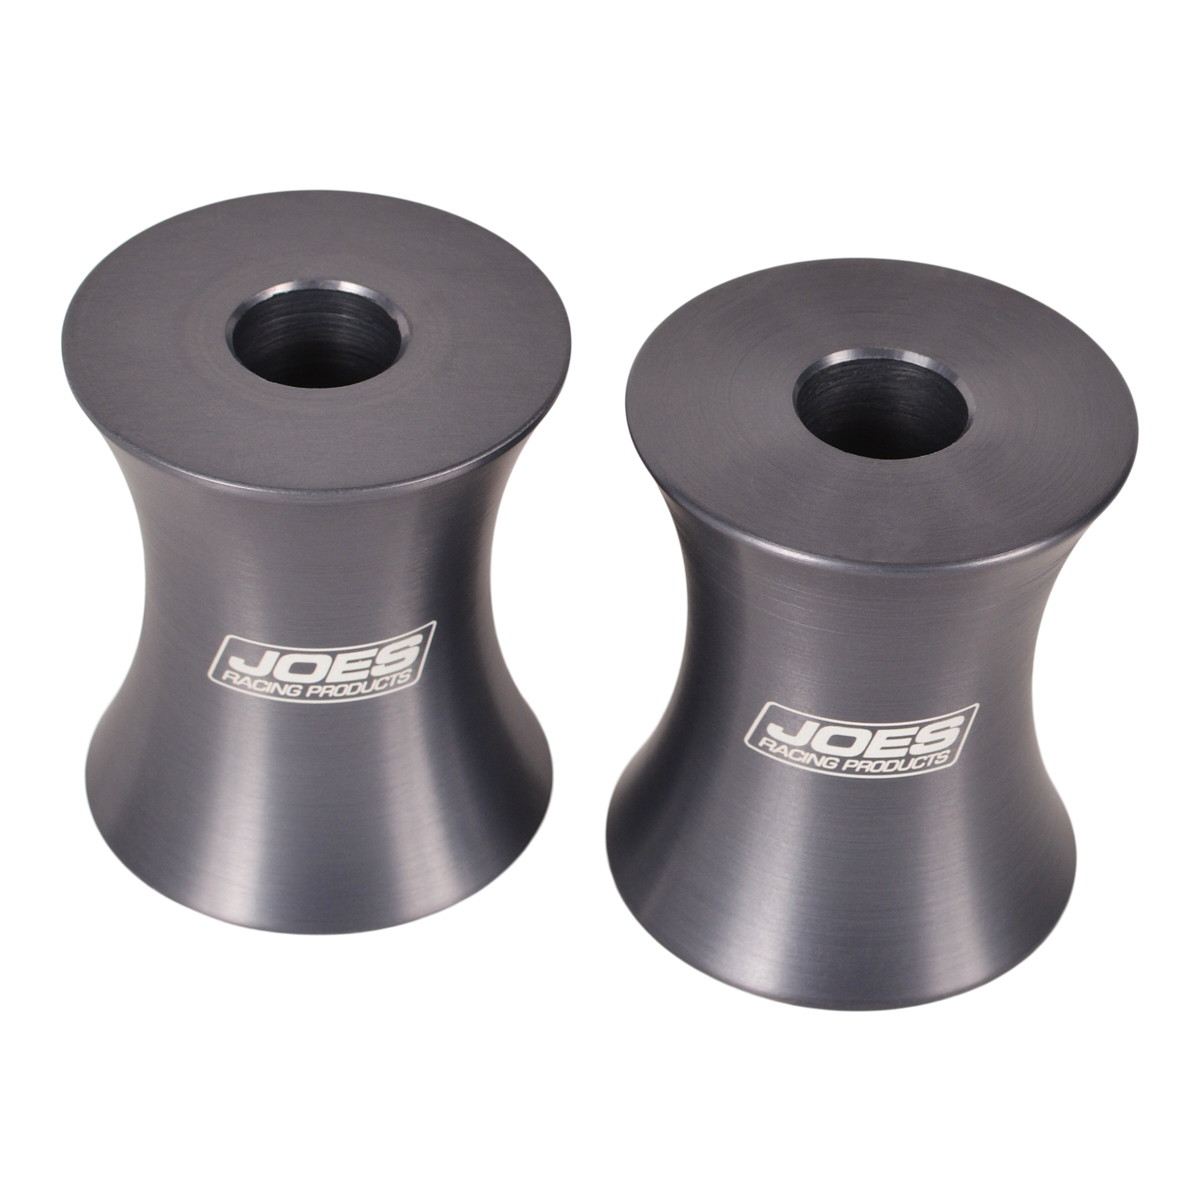 Joes Racing Products 10978-B Motor Mount Spacer, 2 in Thick, 1/2 in ID, Aluminum, Black Anodized, Pair